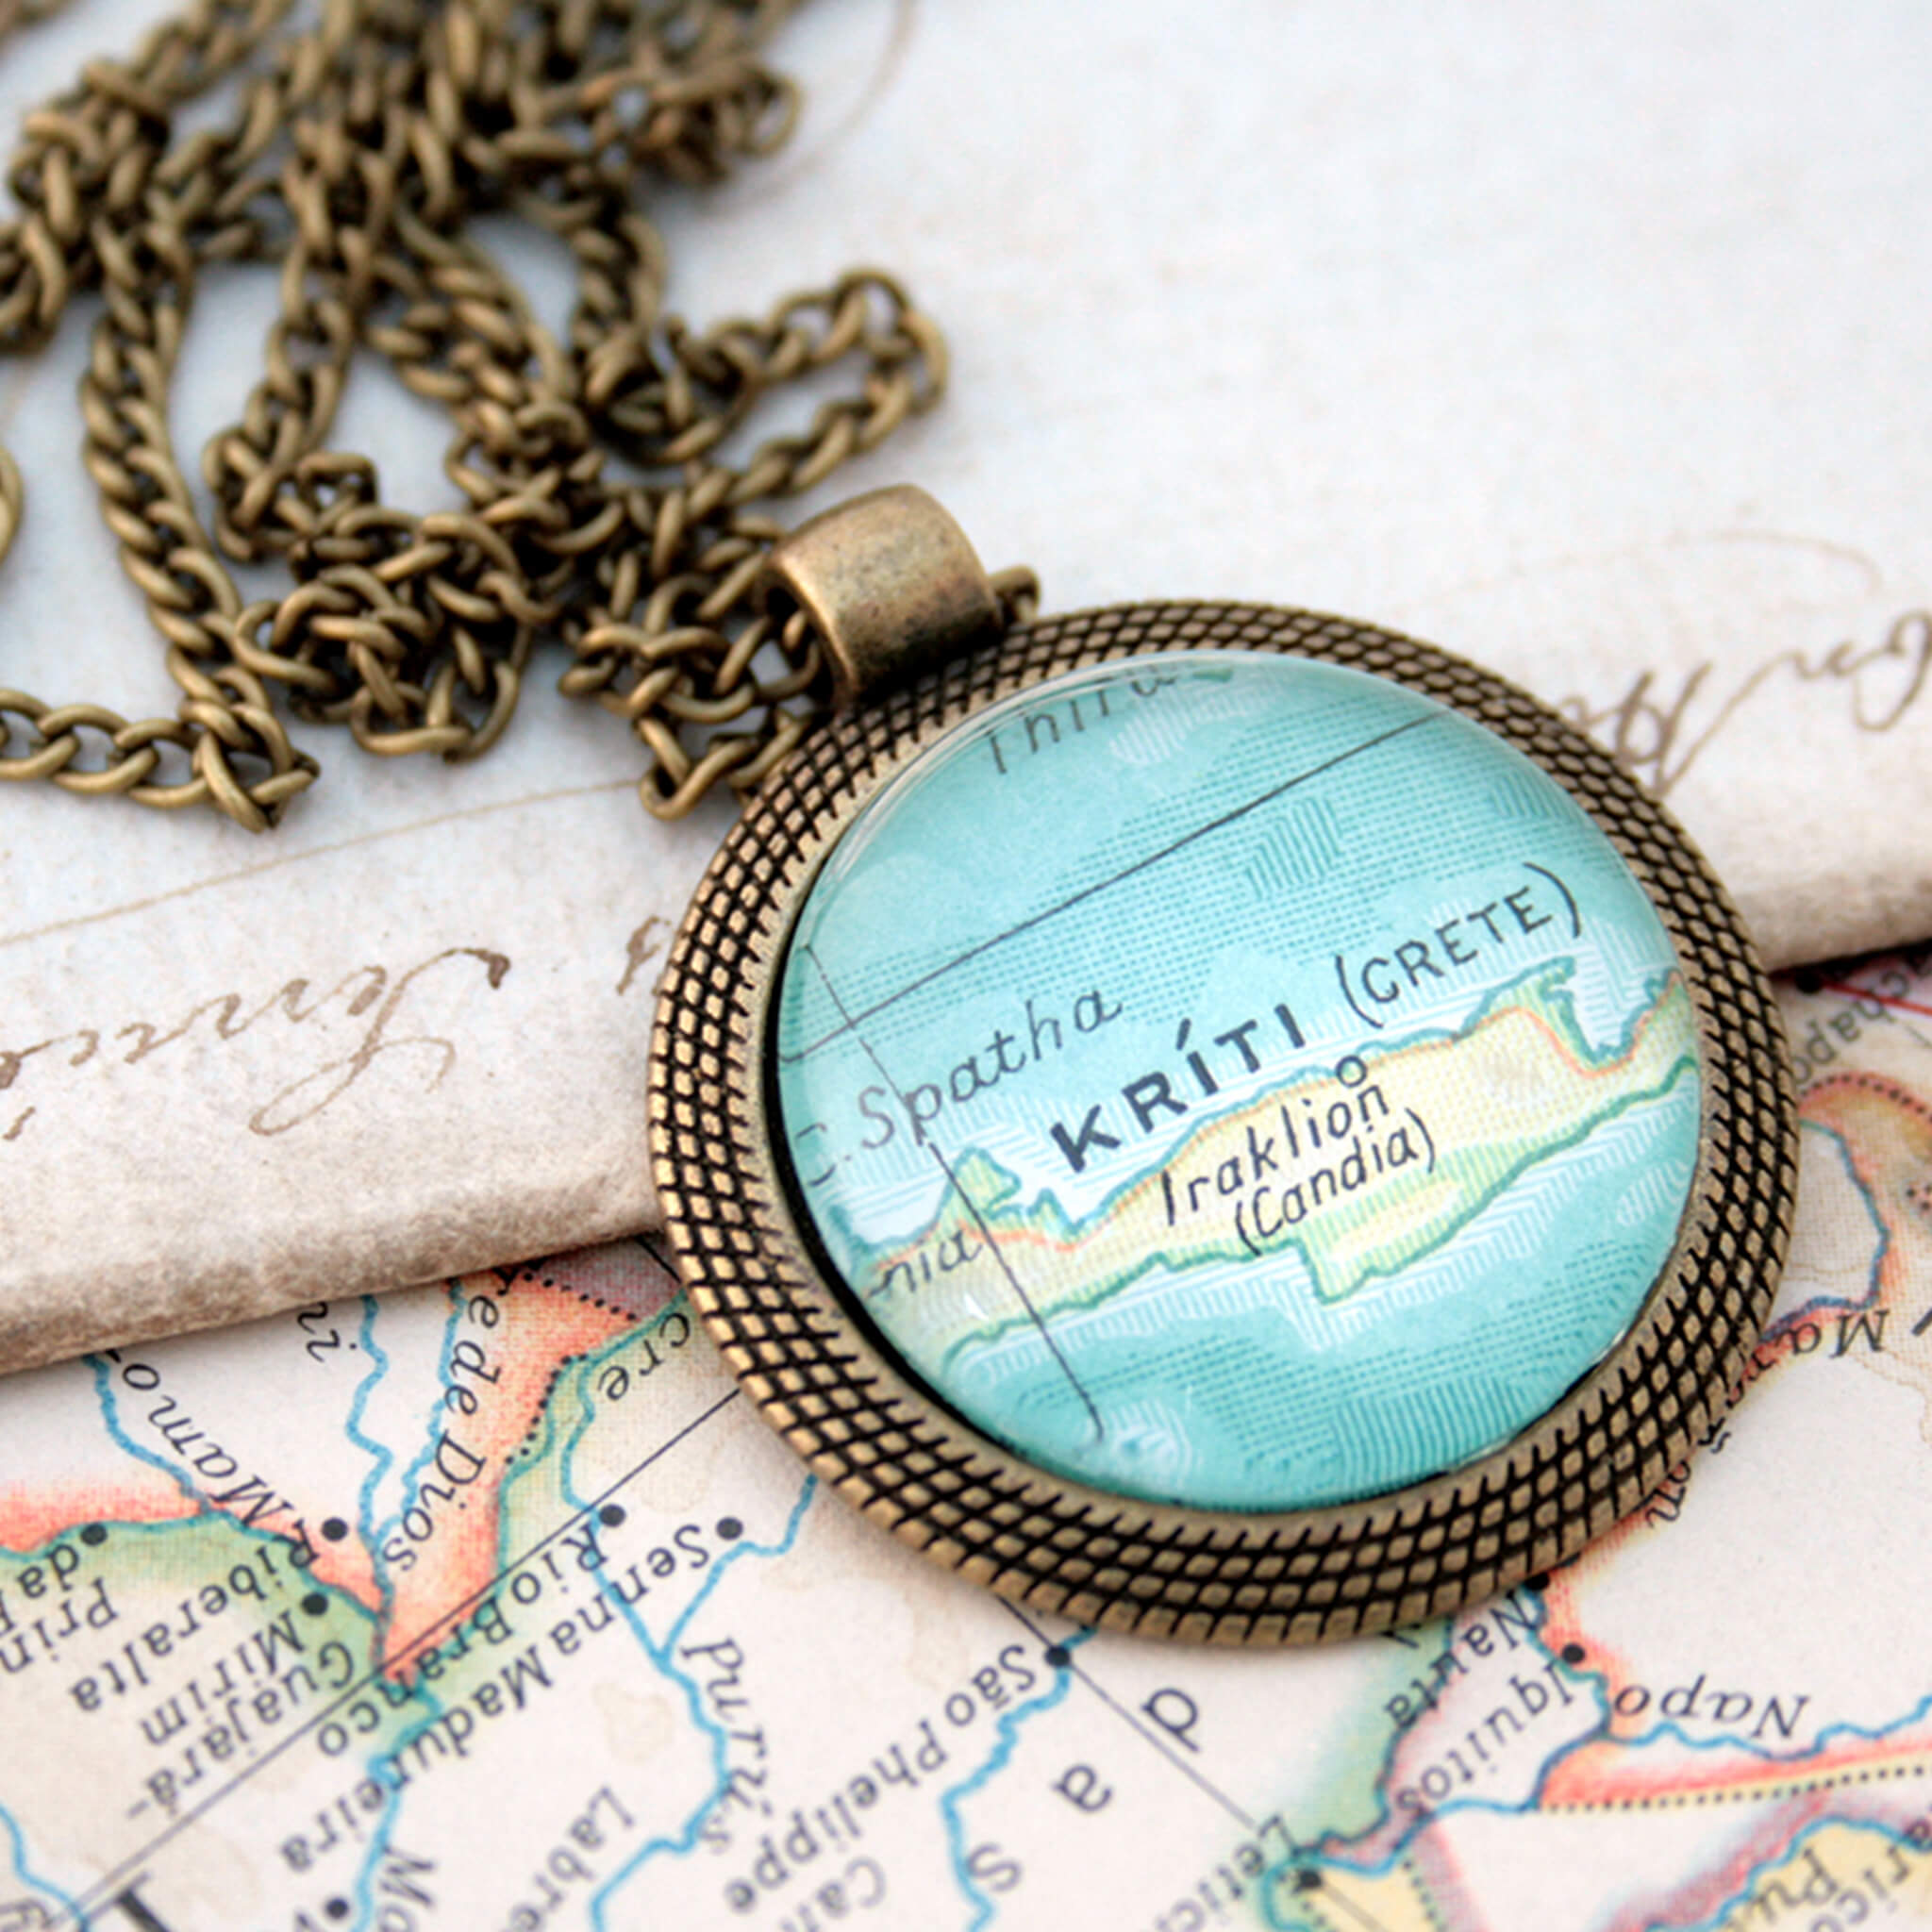 bronze coloured pendant necklace with map of Kriti